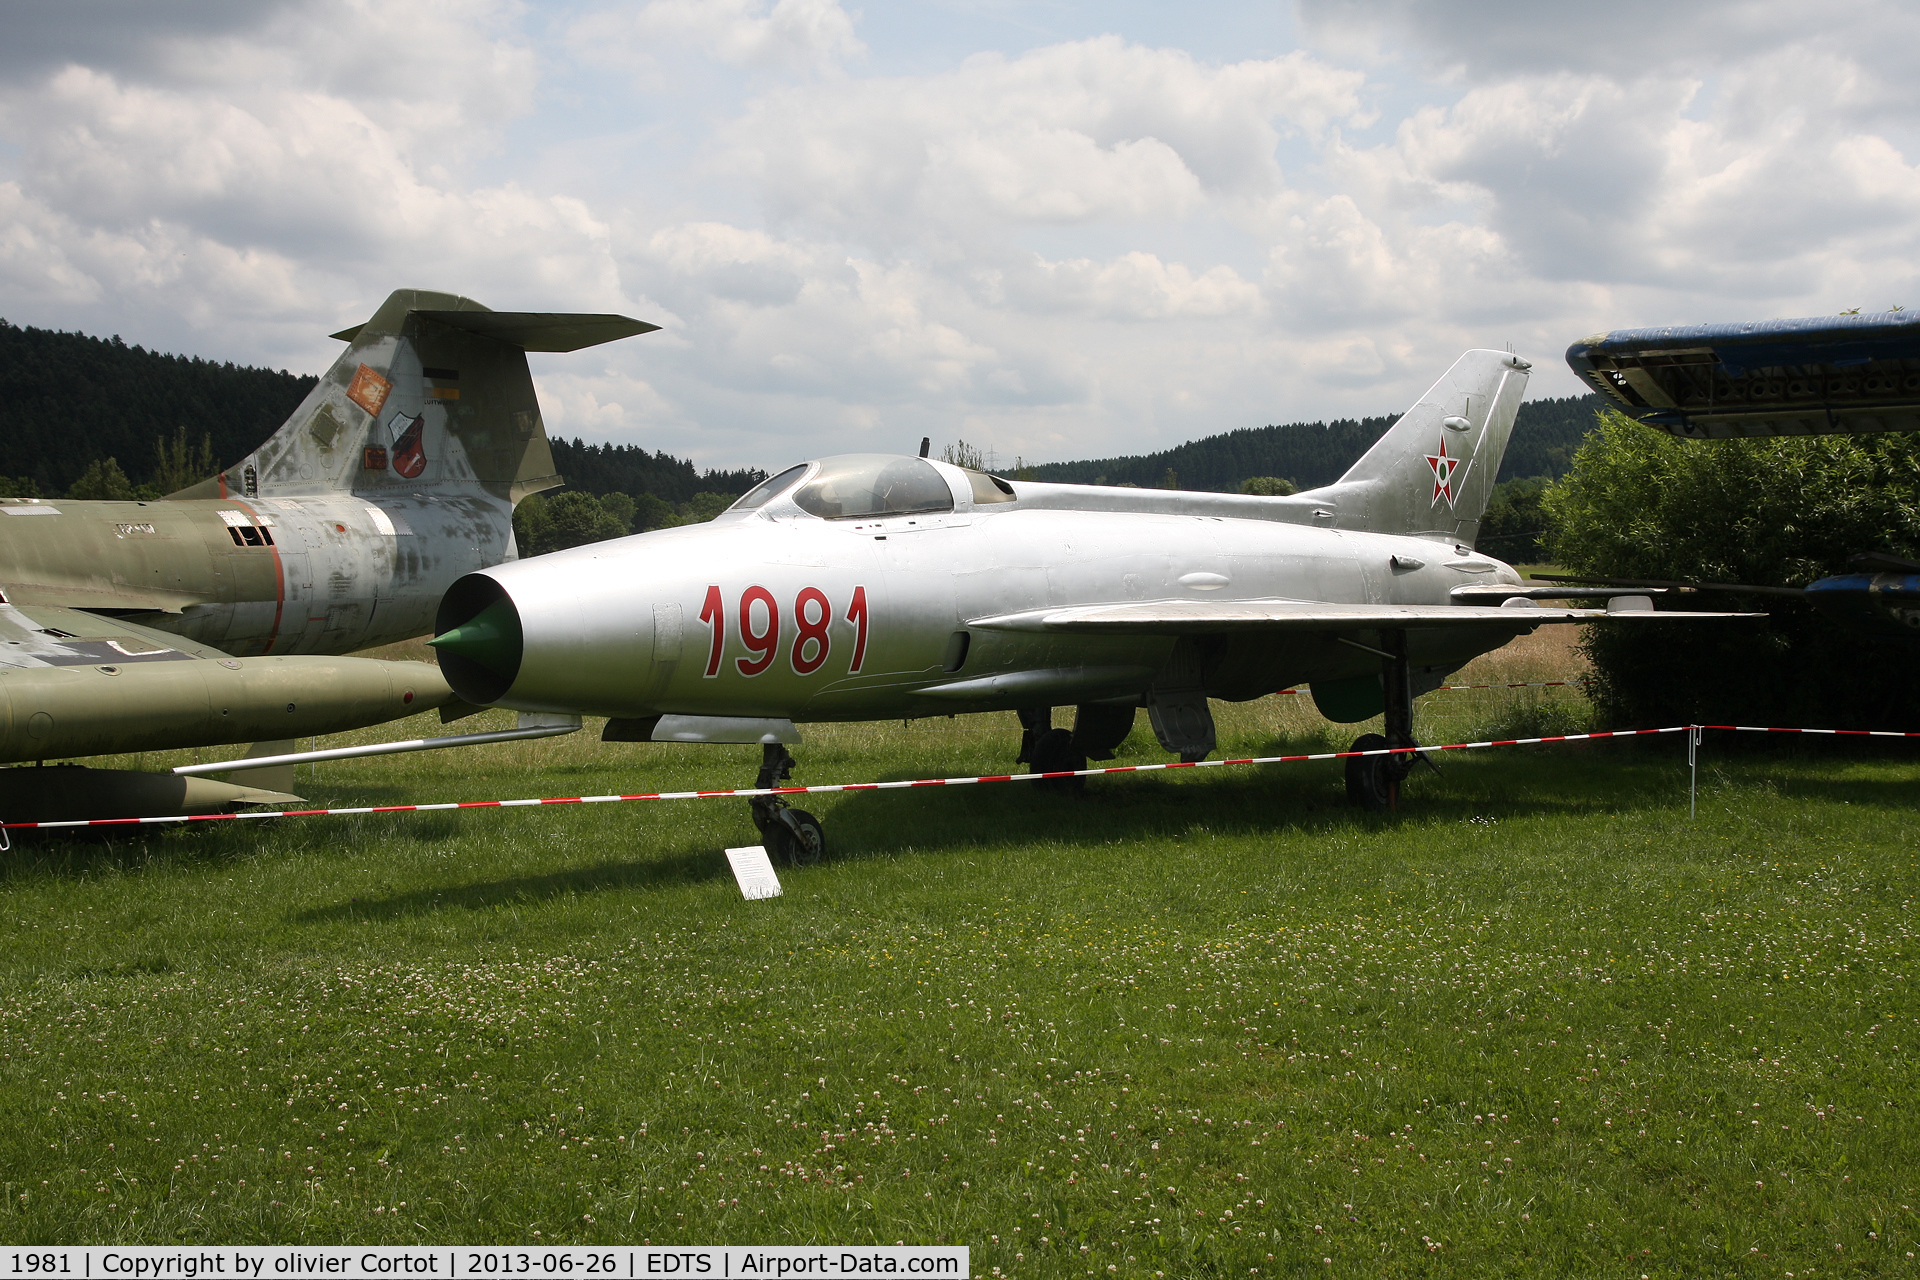 1981, 1956 Mikoyan-Gurevich MiG-21F-13 C/N 1981, preserved